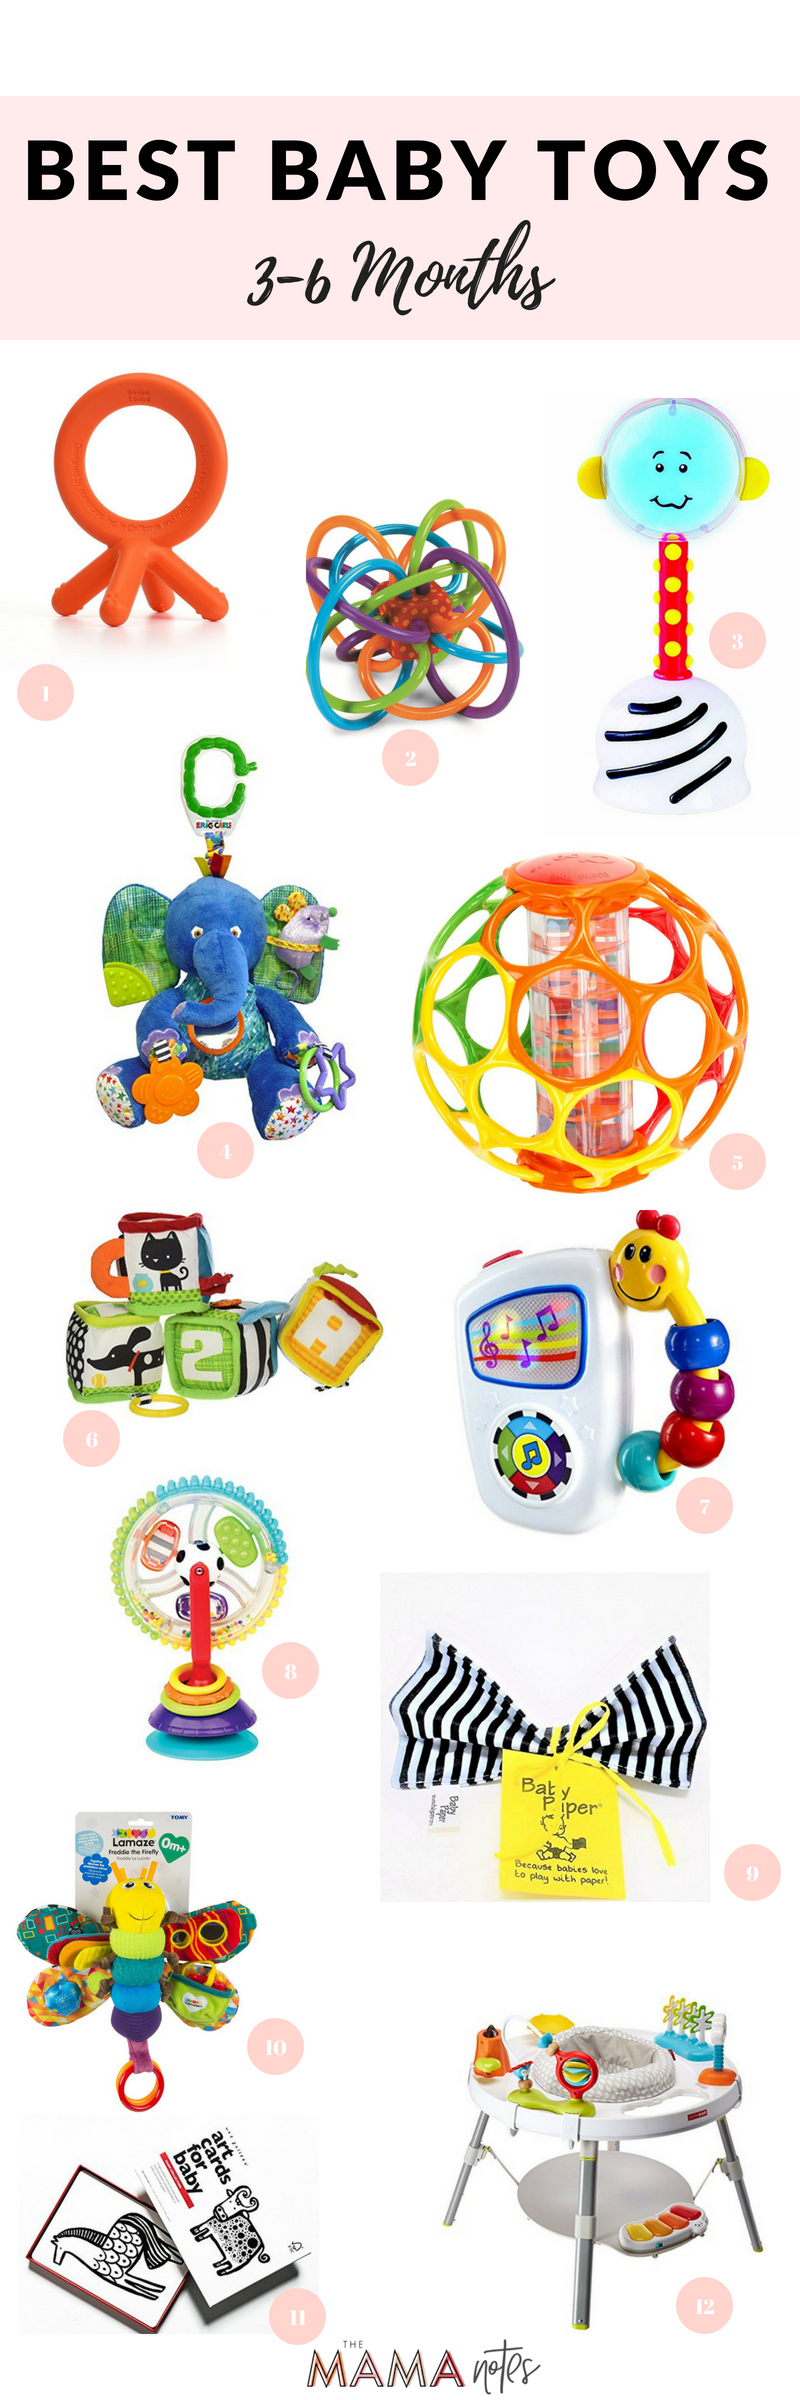 toys for under 3 months